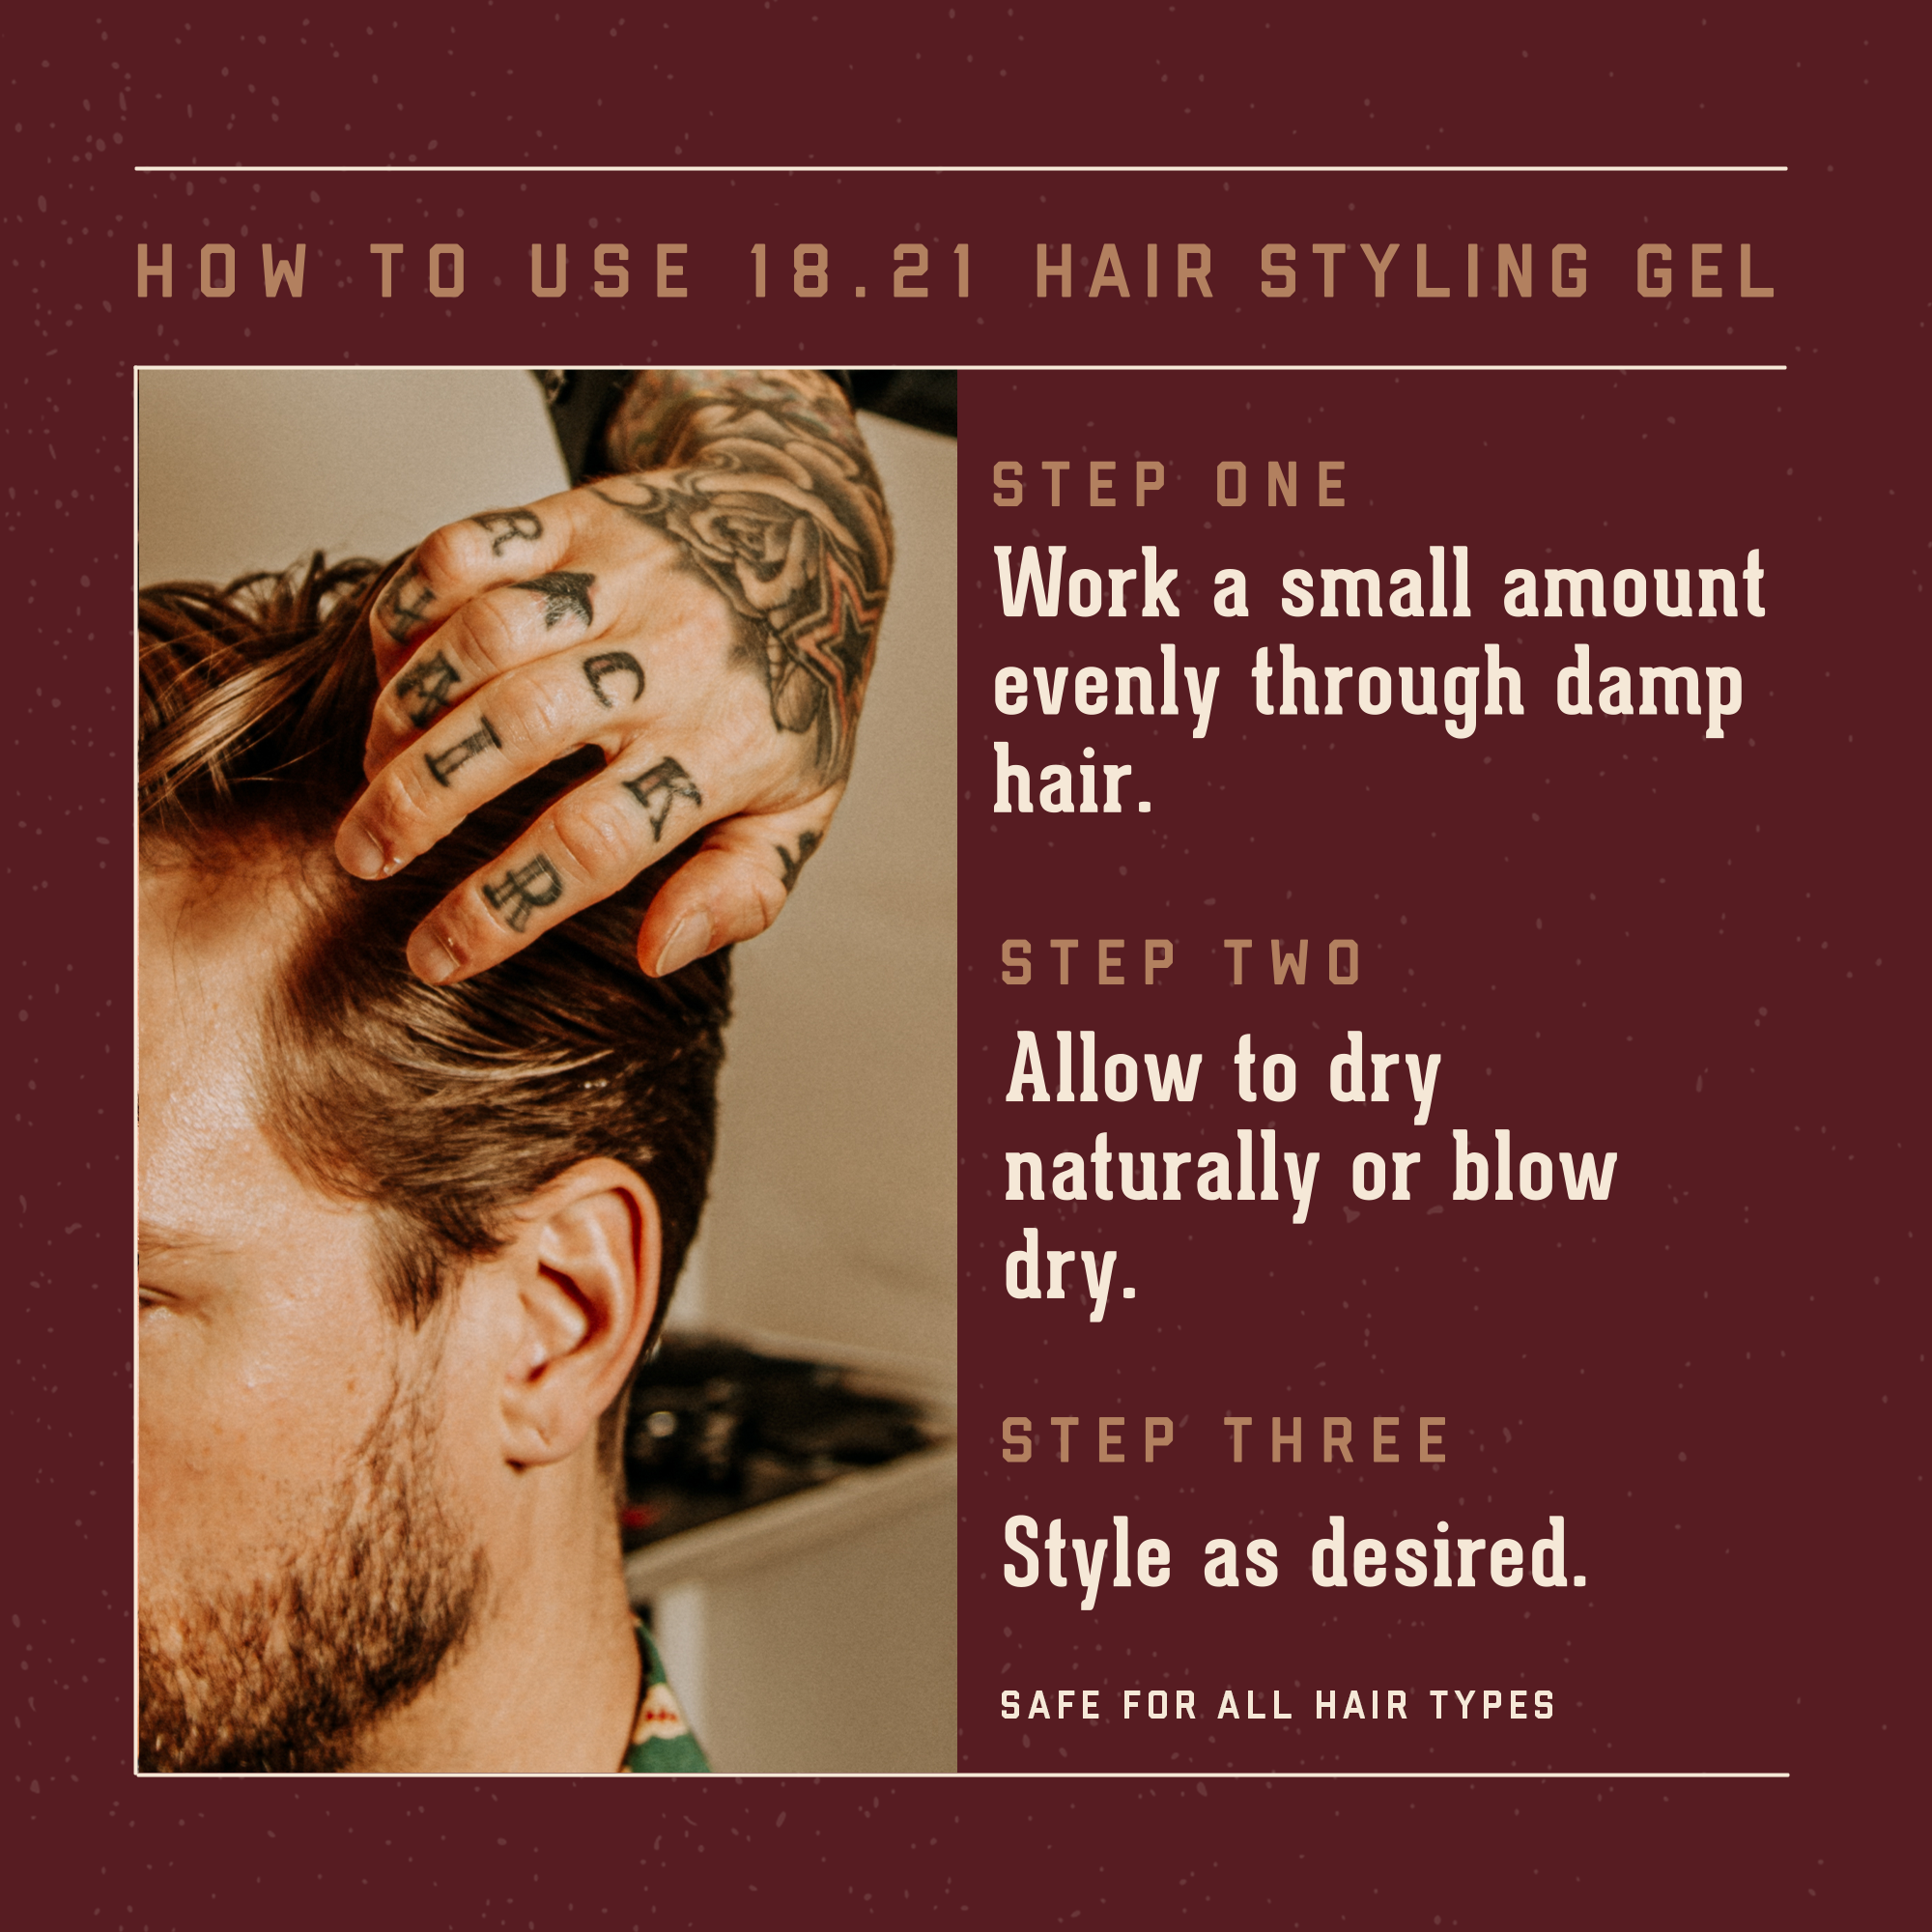 How to Use 18.21 Hair Styling Gel    Step One:  work a small amount evently through damp hair.  Step Two:  Allow to dry naturally or blow dry.   Step Three:  Style as desired.      It is safe for all hair types